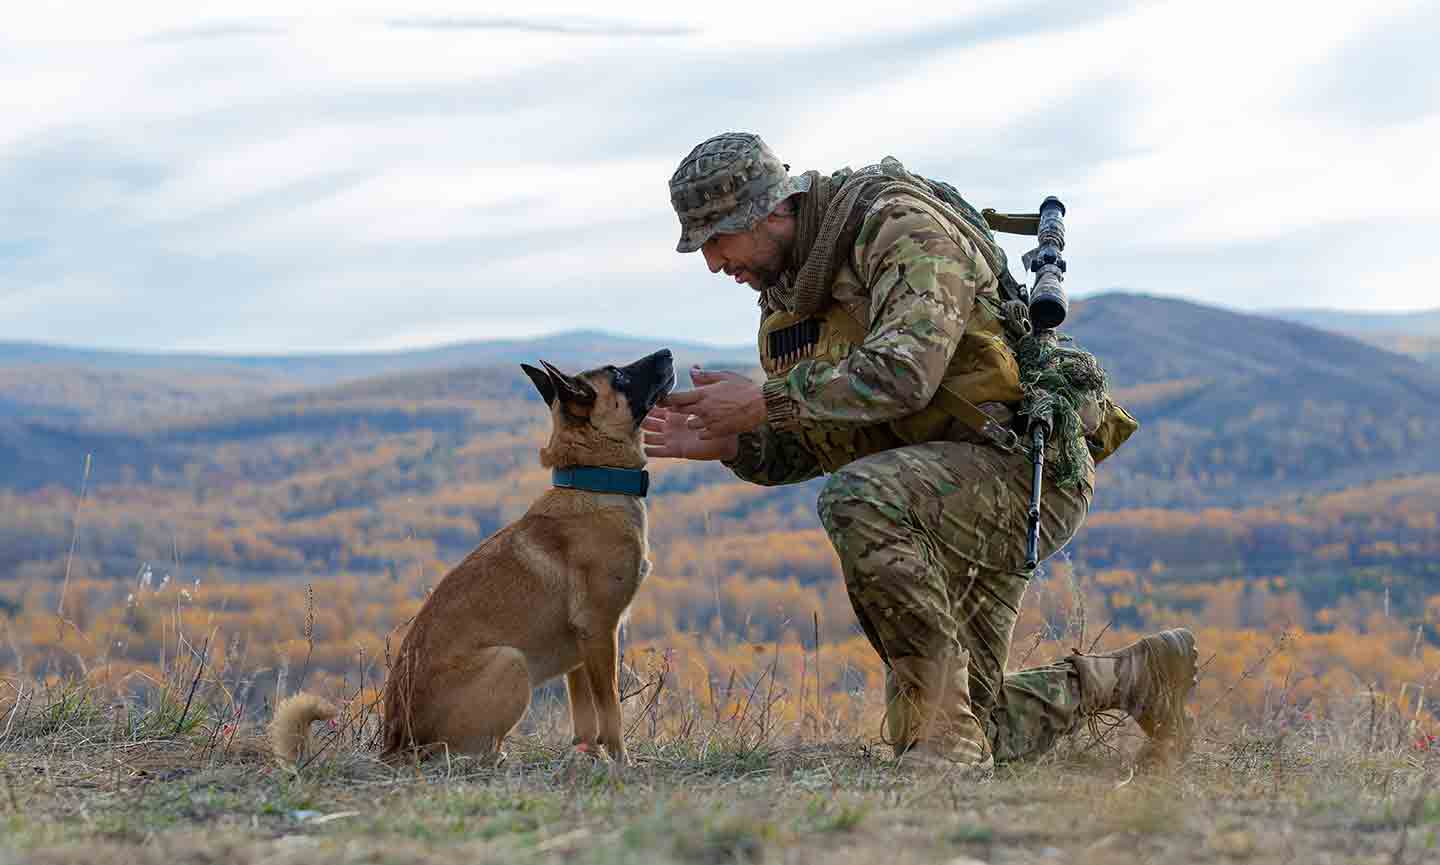 Dogs in Warfare: Essential Military Dog Gear You Need